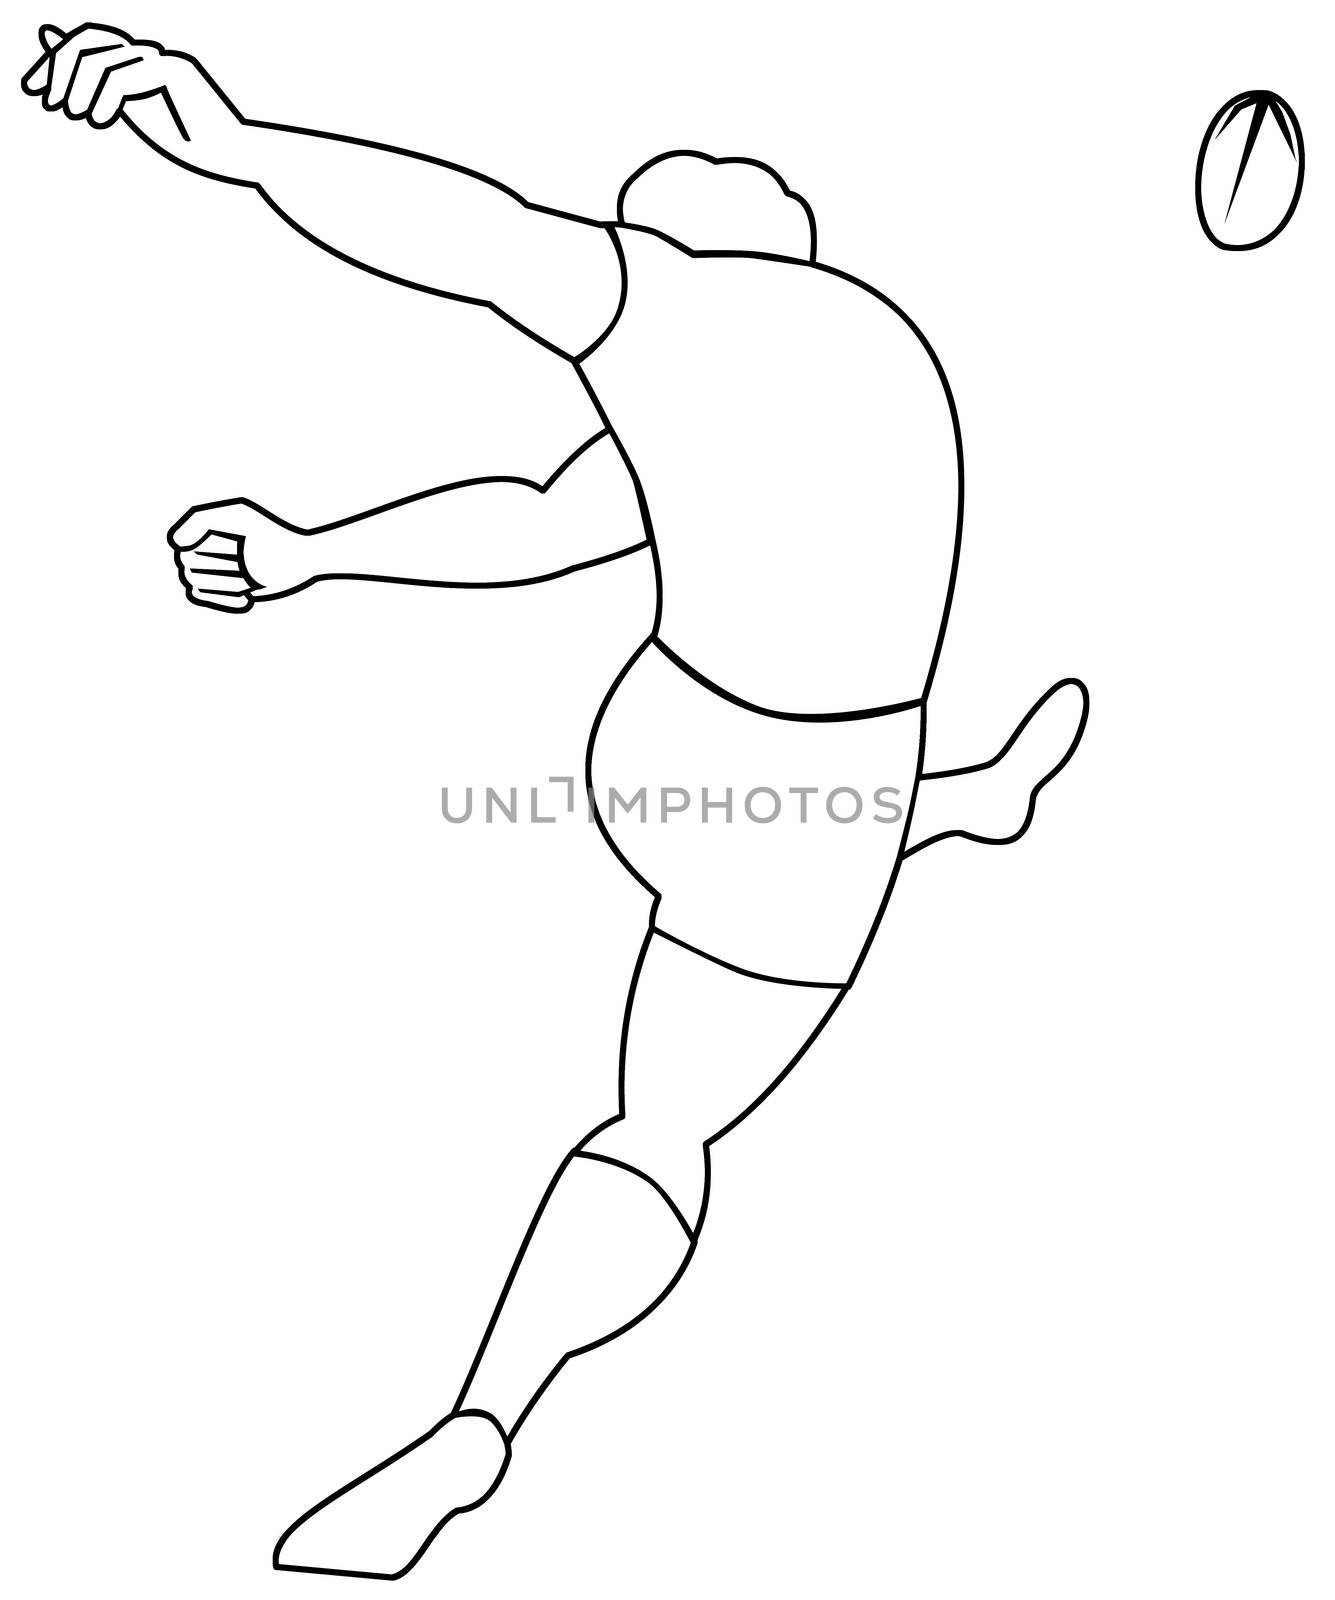 Rugby player kicking ball viewed from rear by patrimonio